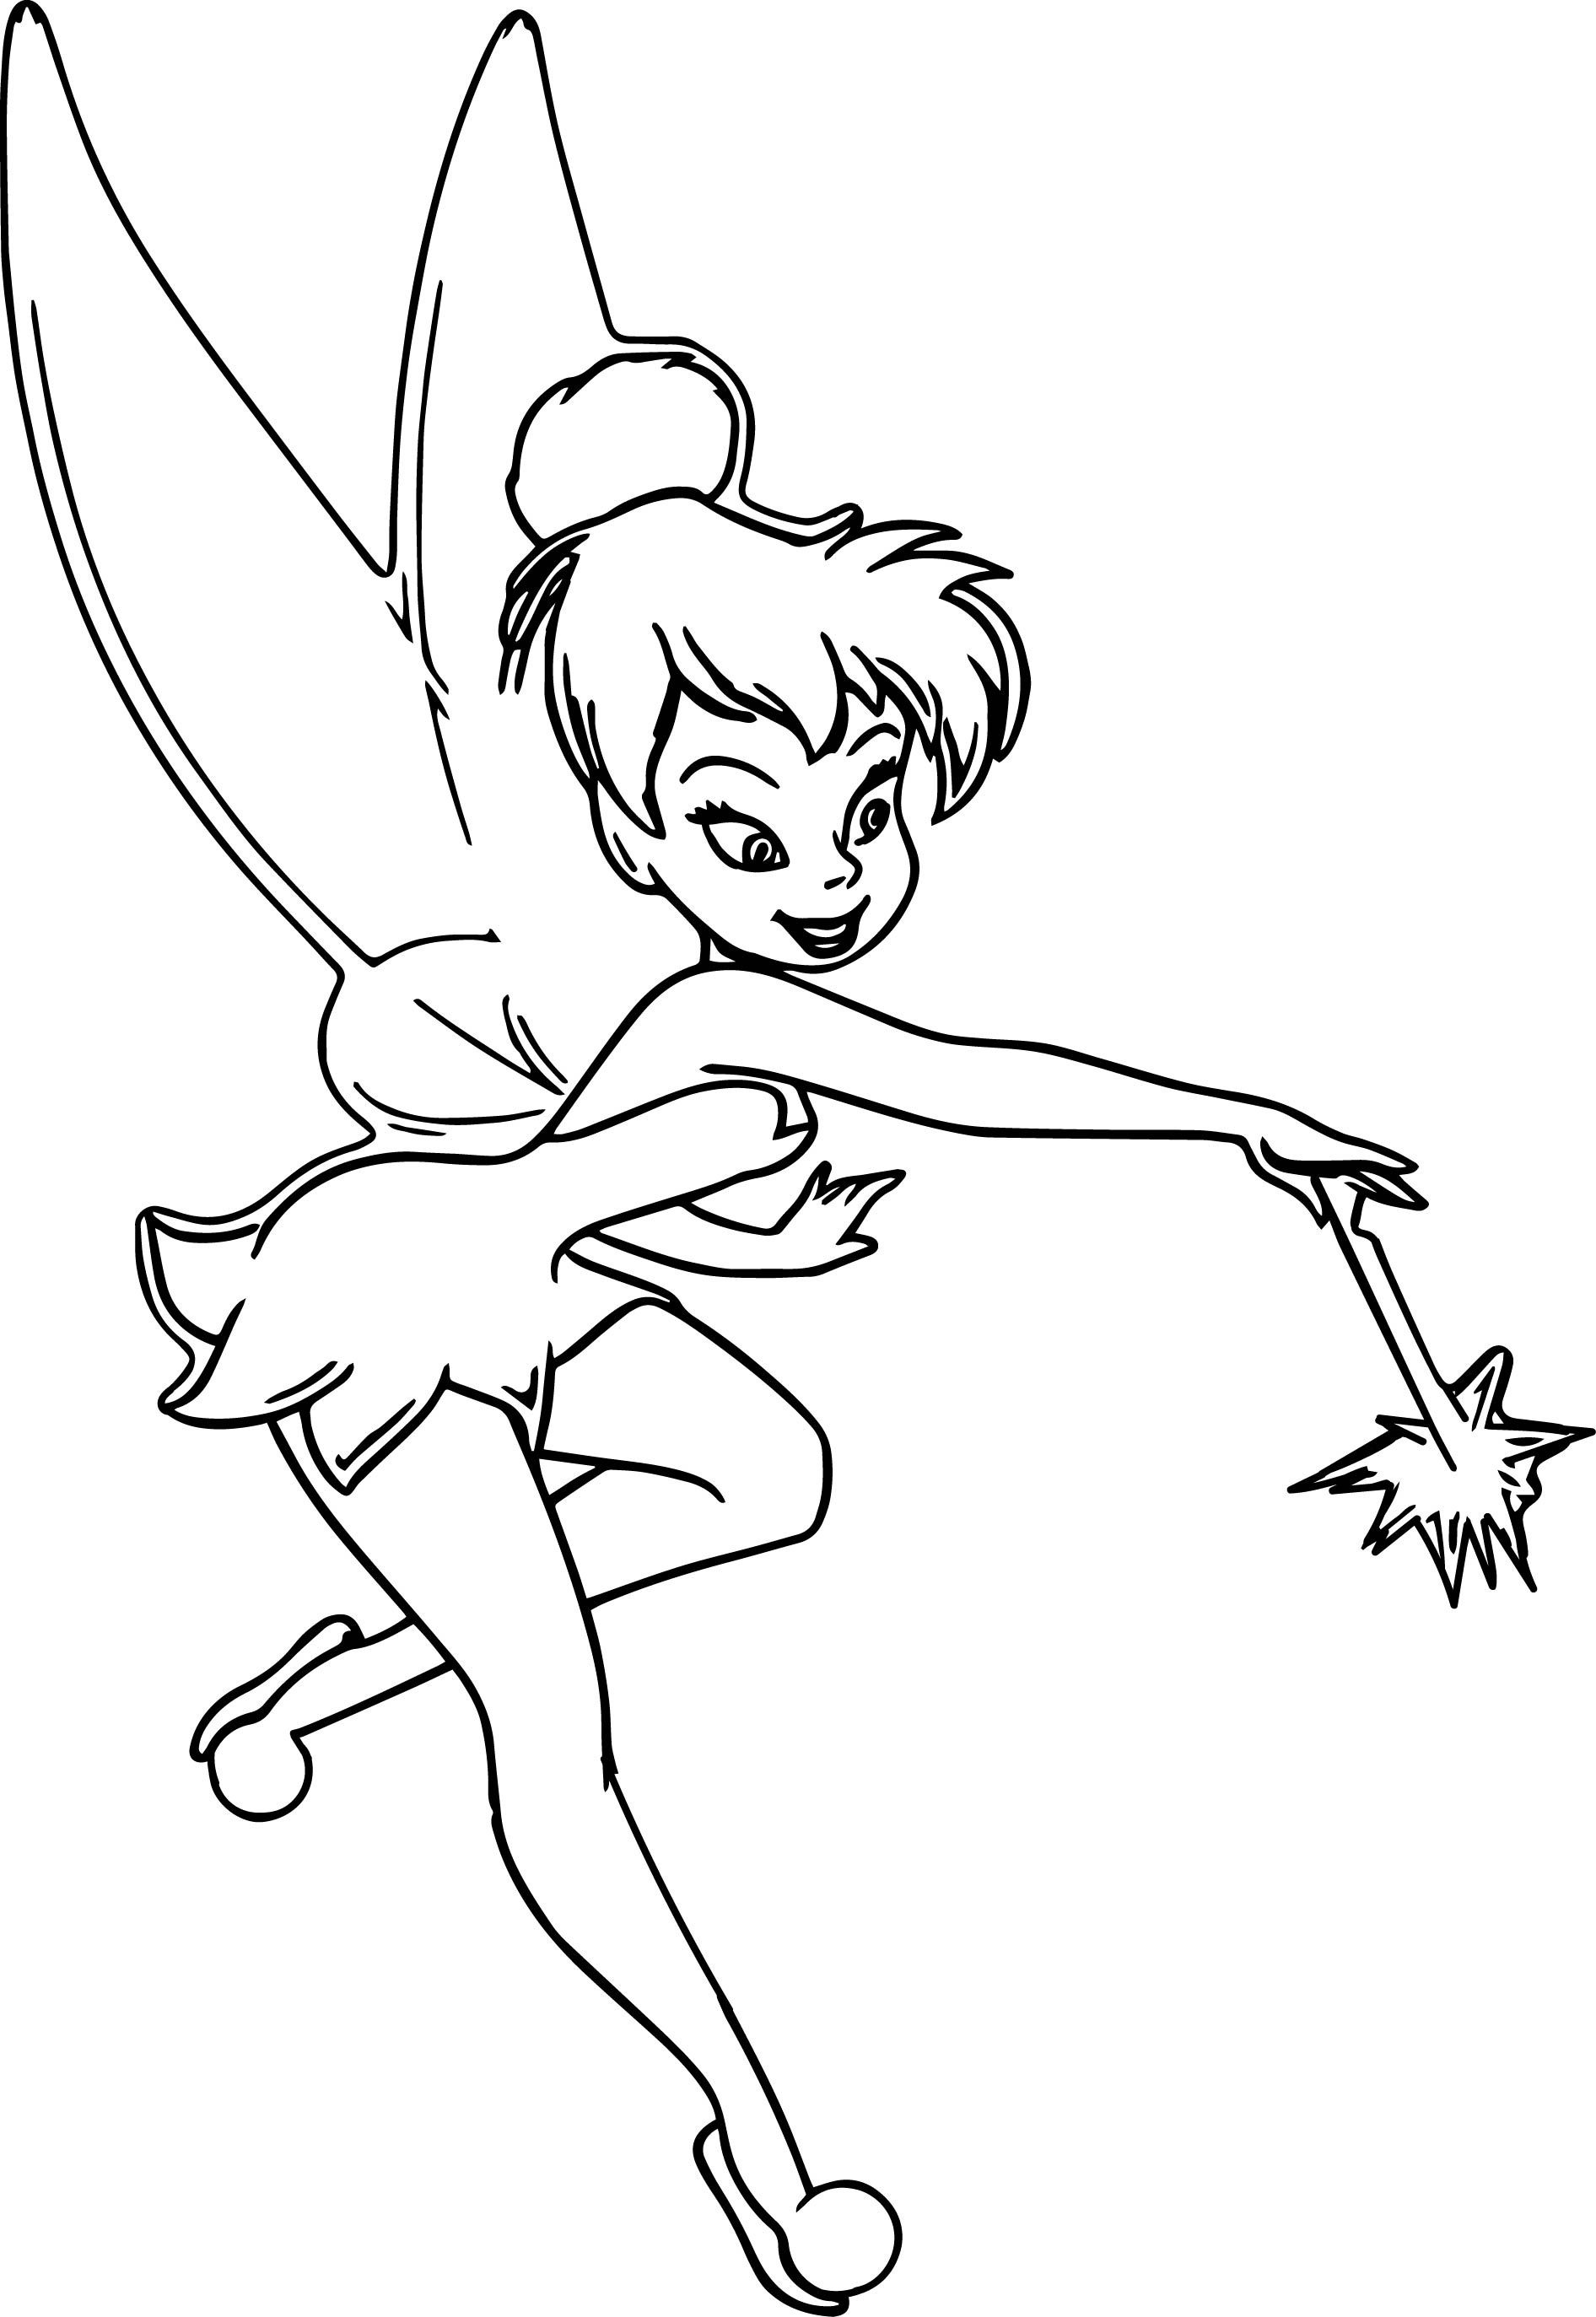 Magic Coloring Pages
 Tinkerbell Magic Coloring Page